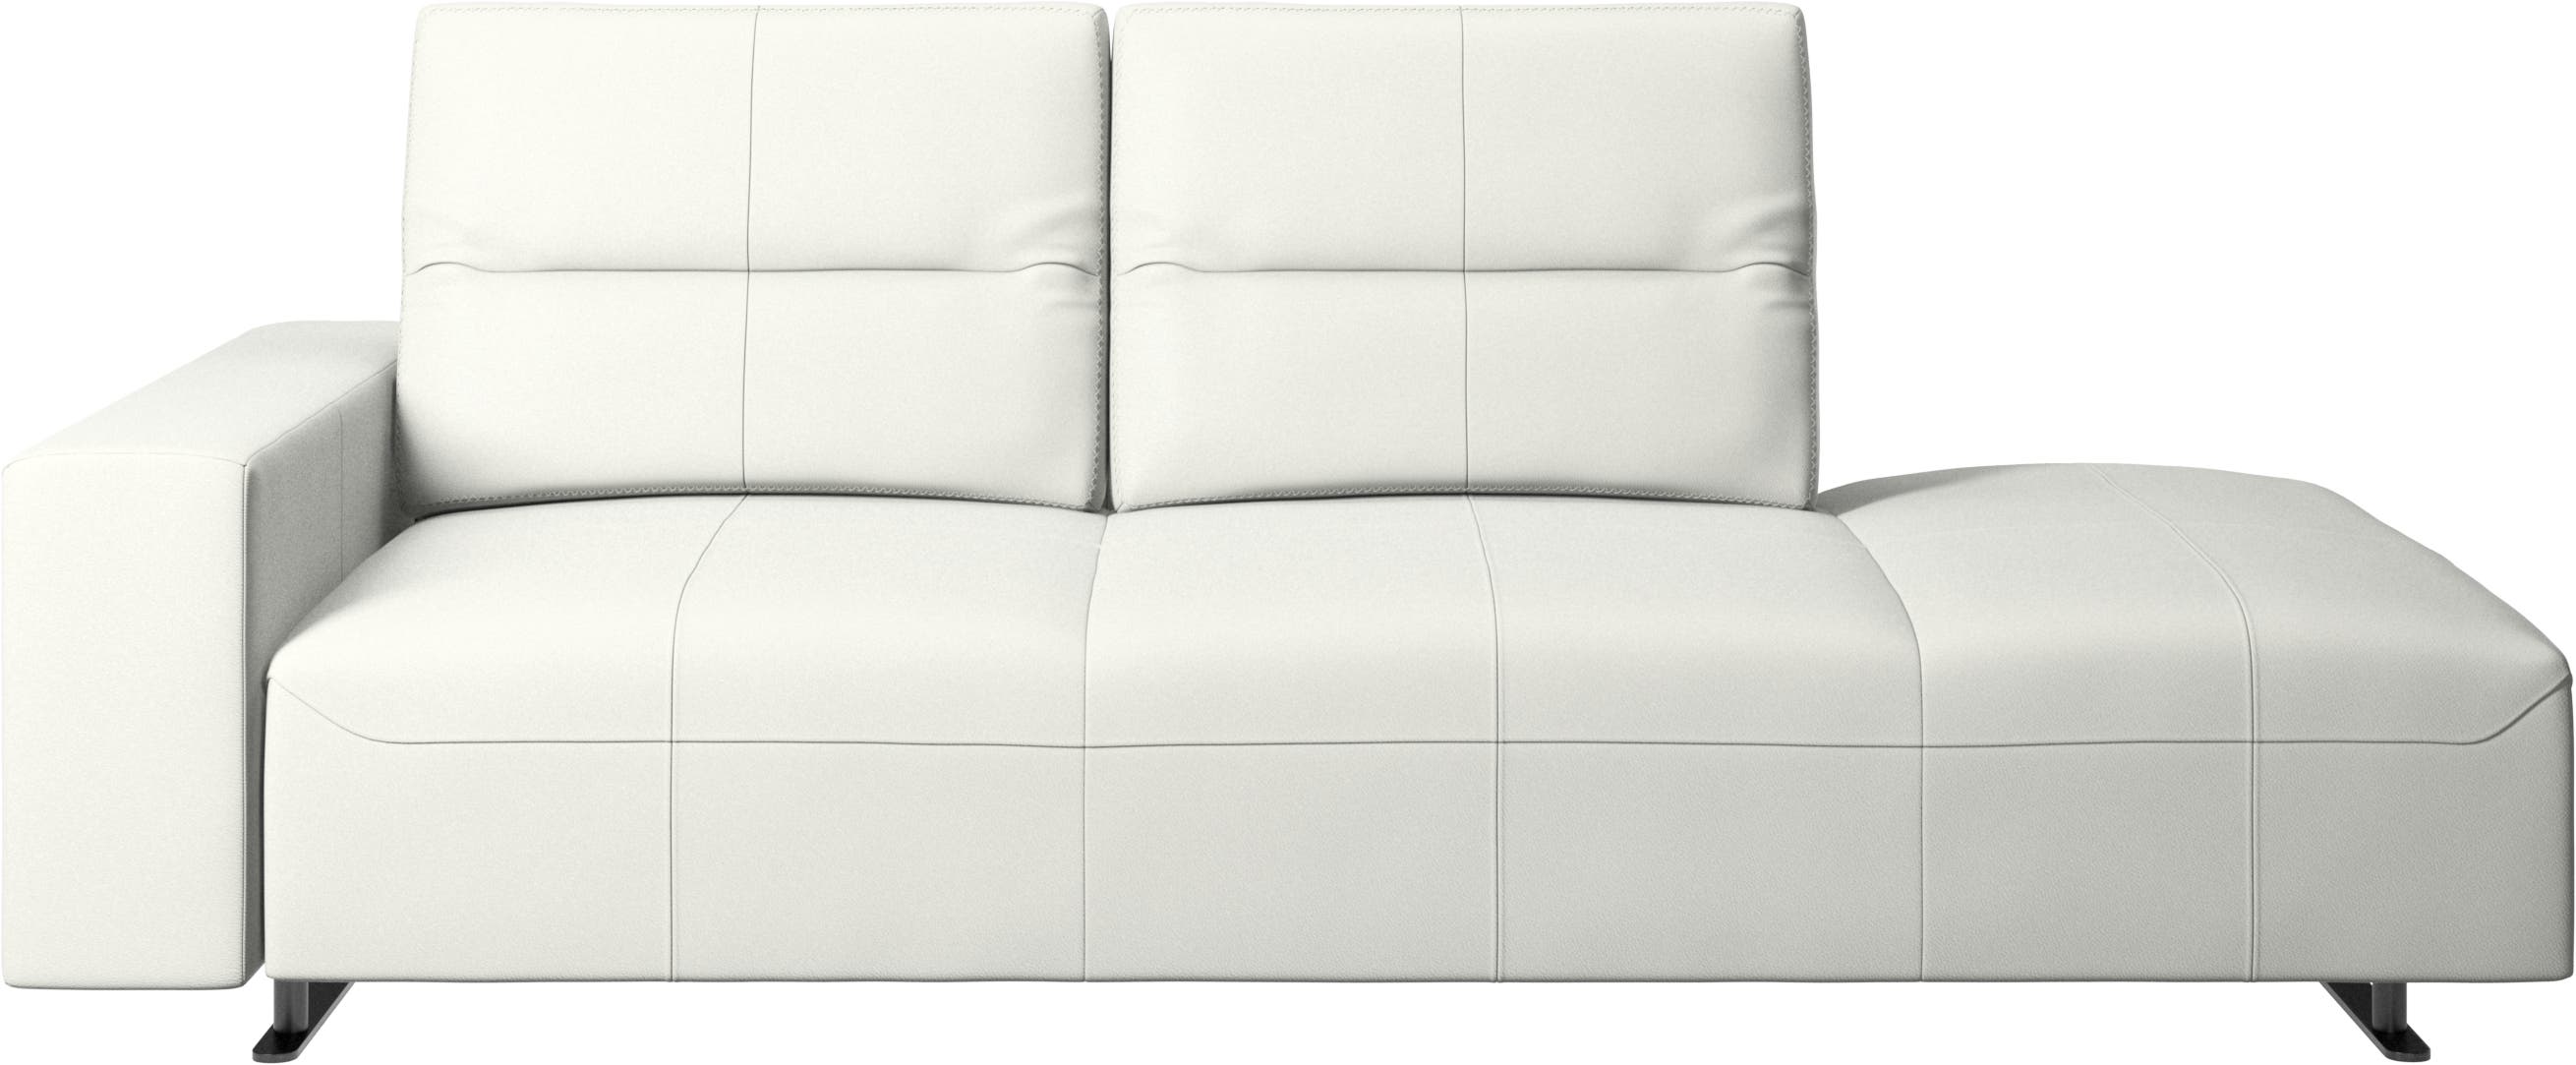 Hampton sofa with adjustable back and lounging unit right side, armrest left